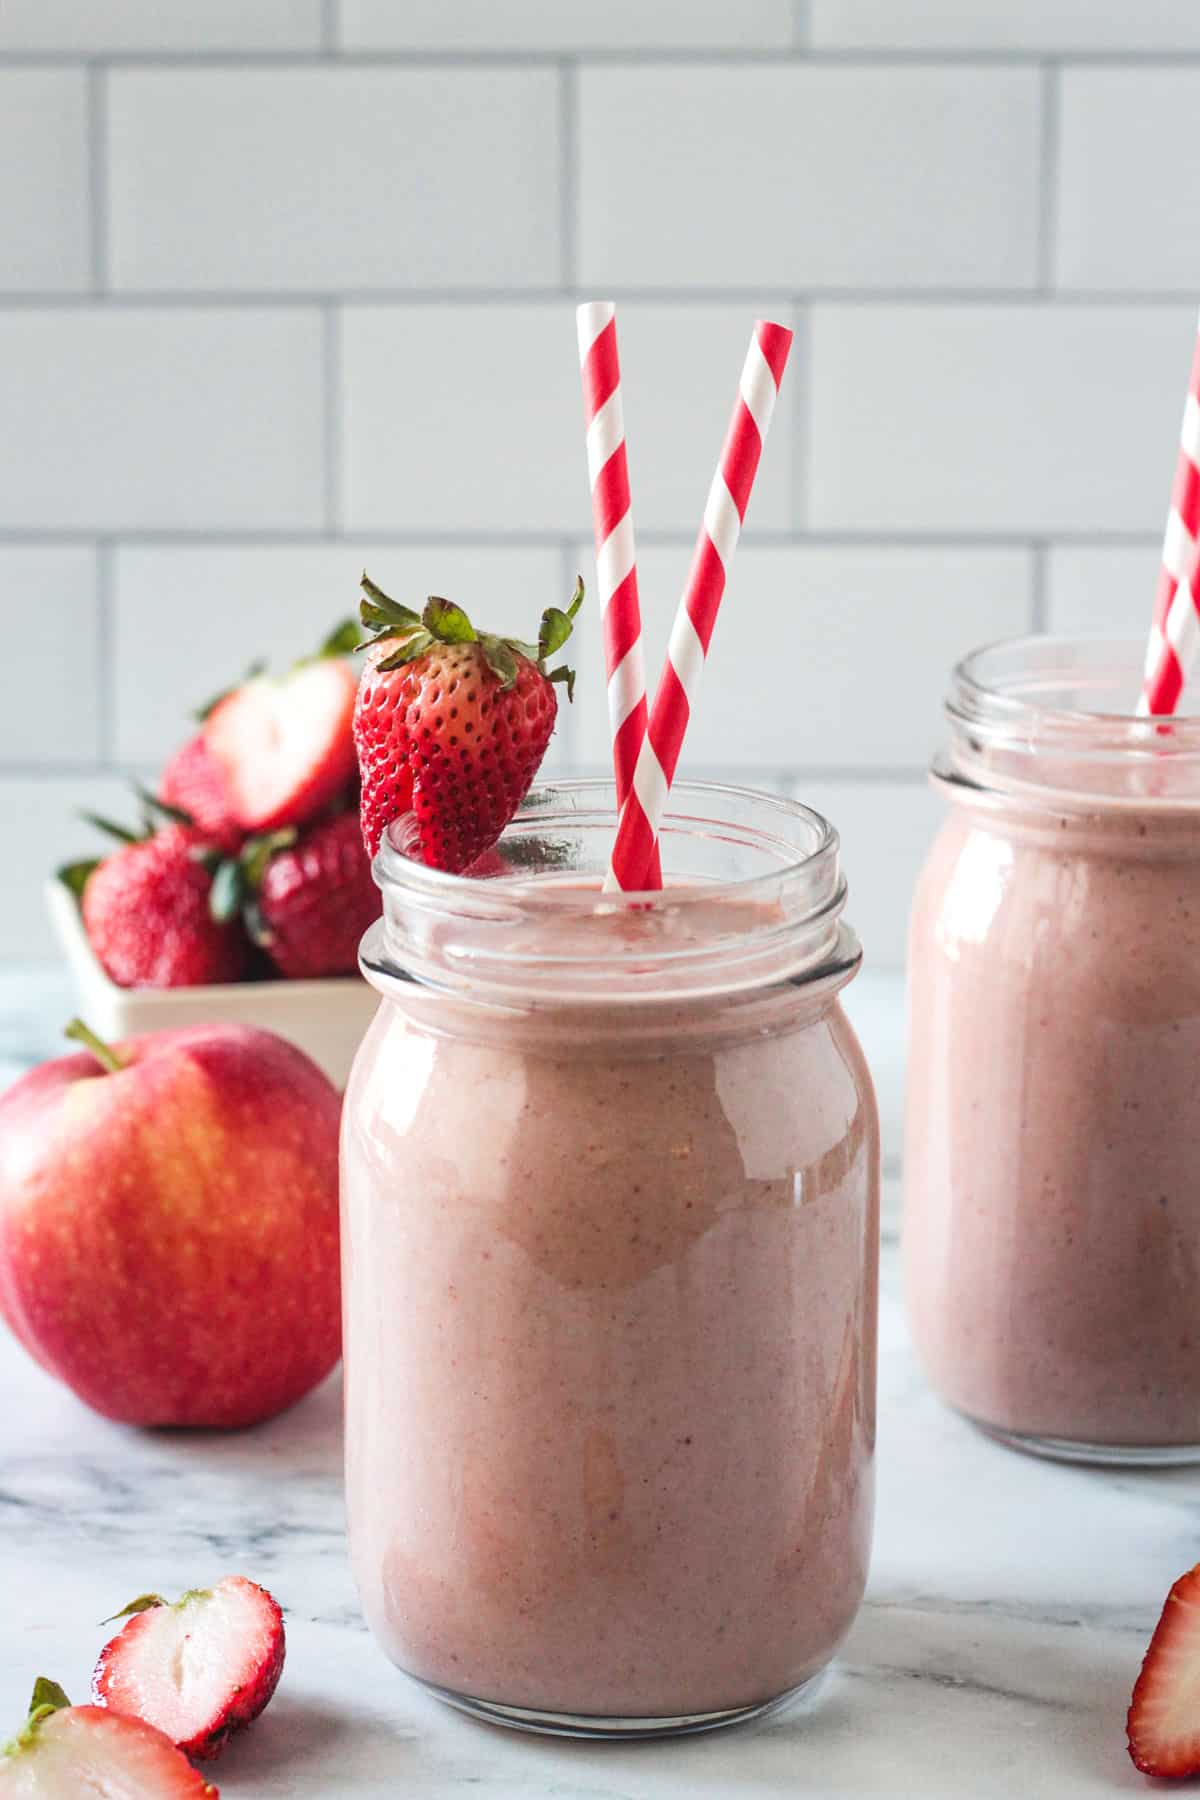 Strawberry Apple Smoothie in a glass with two red and white striped straws.